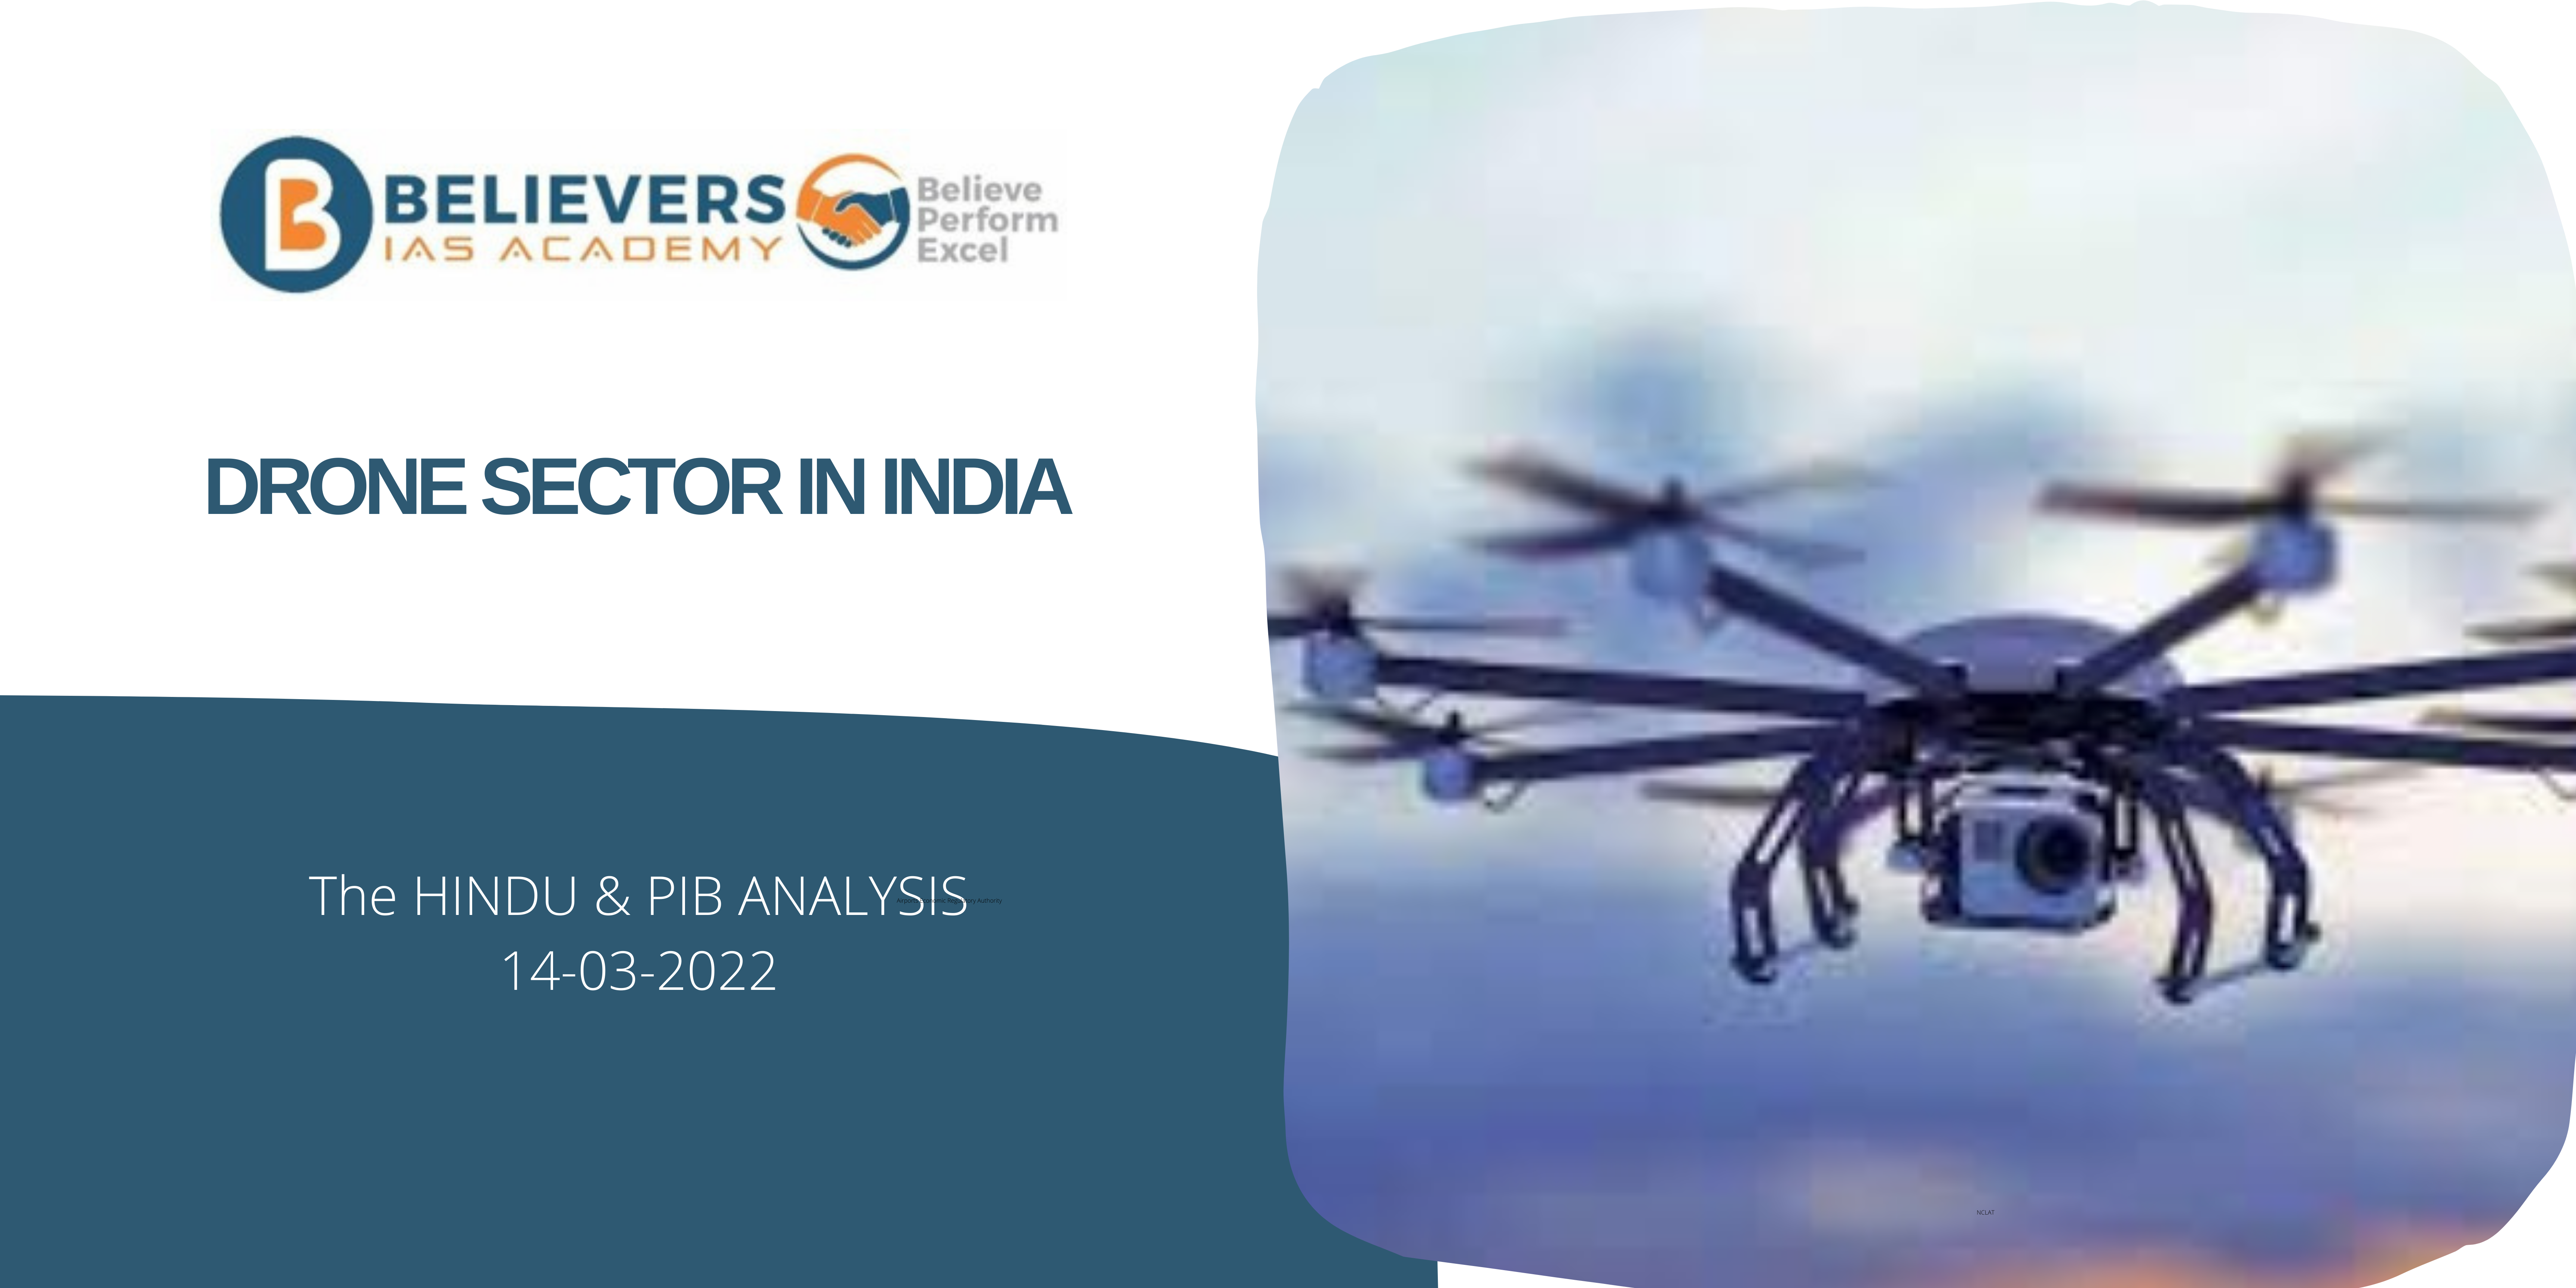 UPSC Current affairs - Drone Sector in India